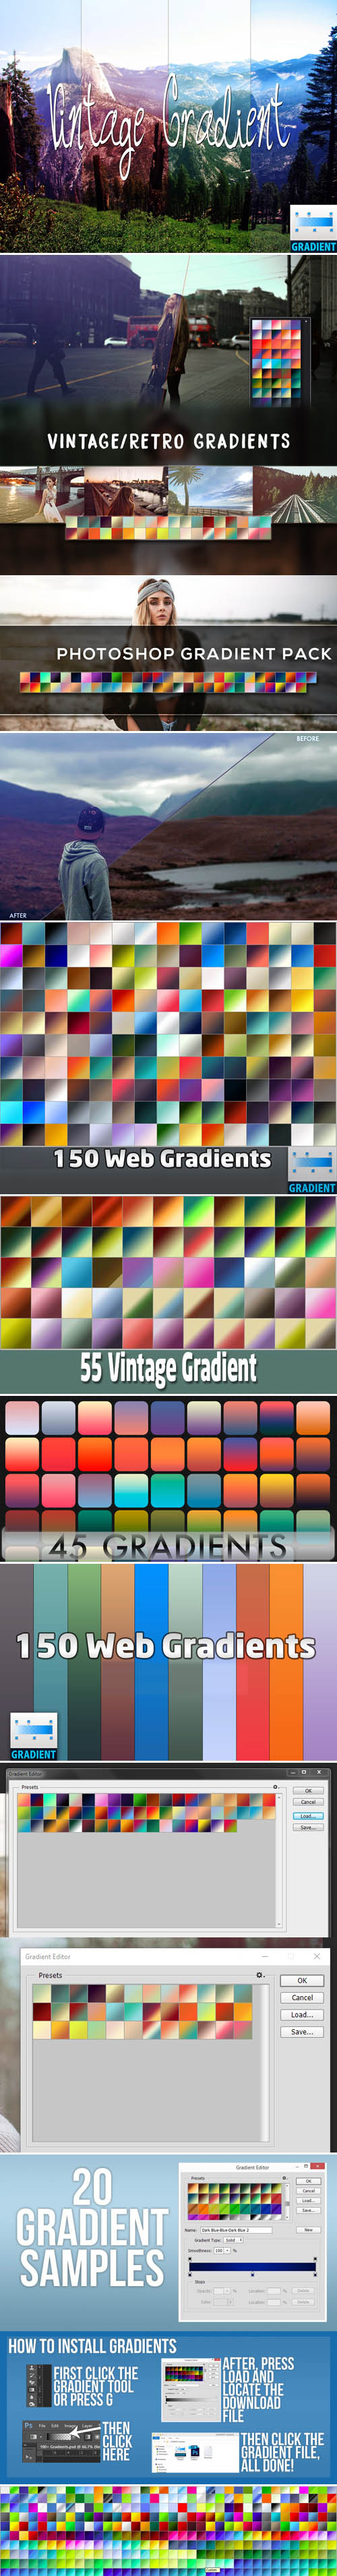 700+ Photoshop Gradients Collection